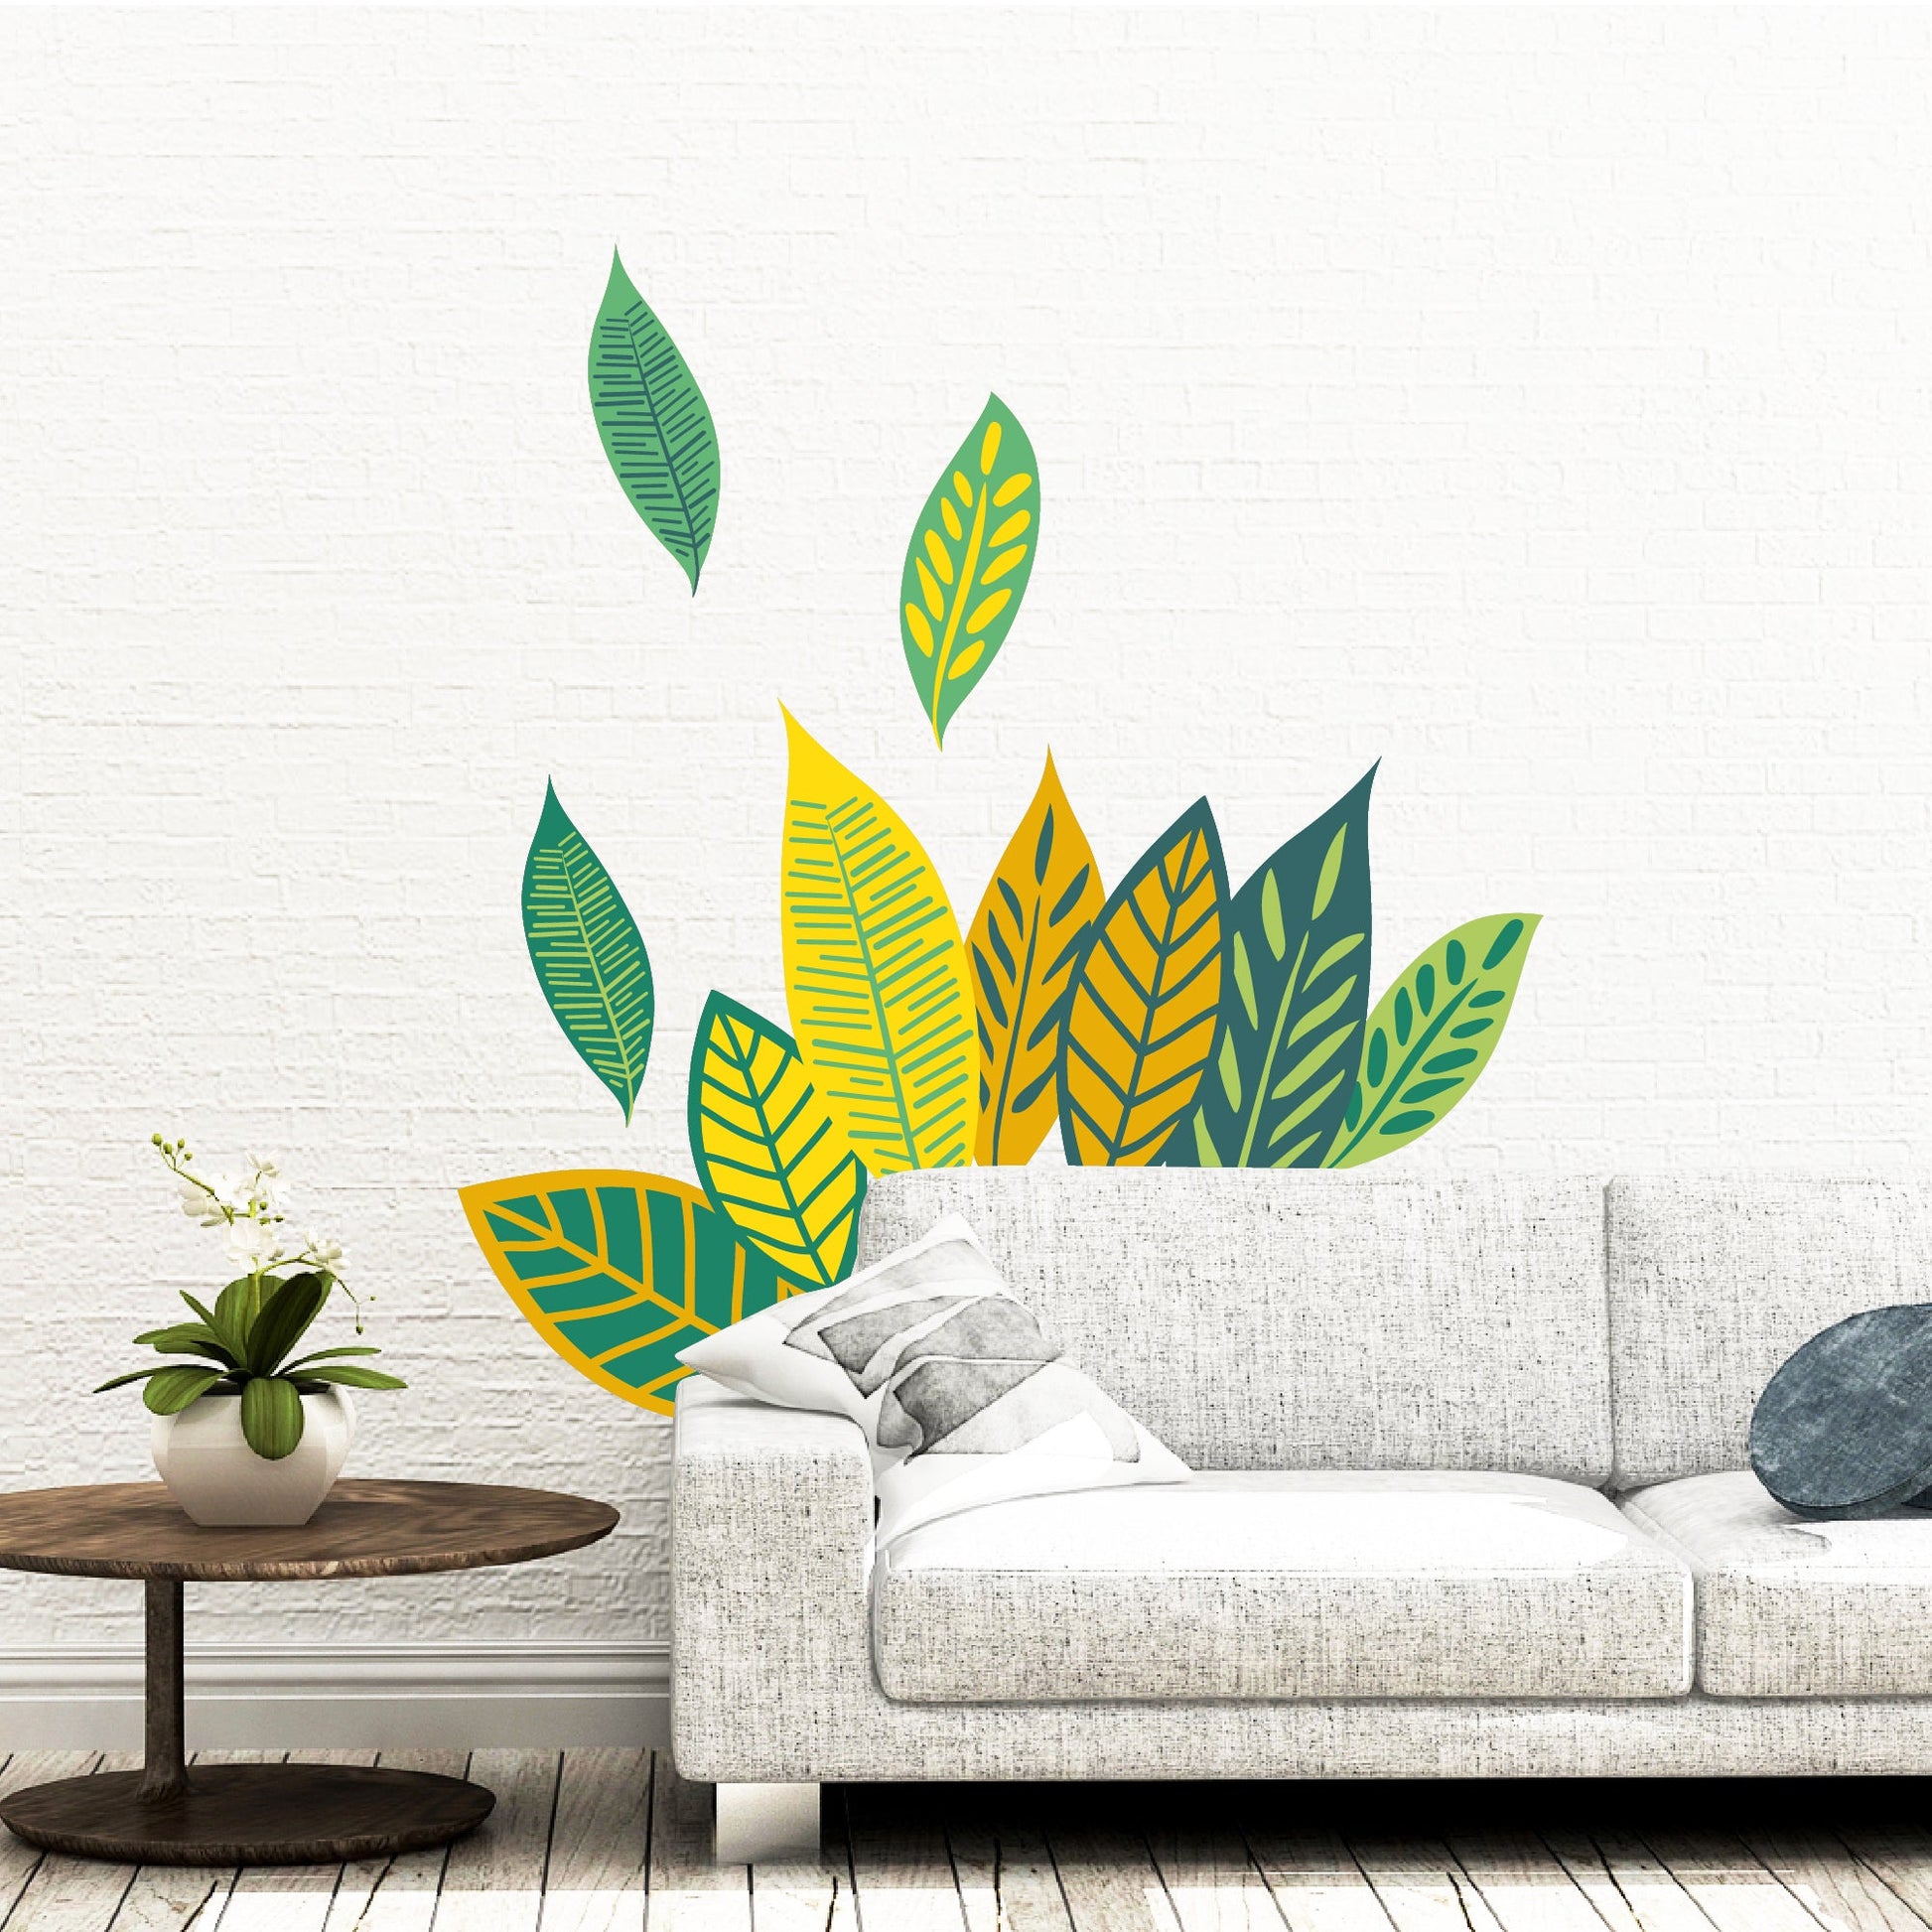 Large Leaves Wall Decals | Yellows + Greens - Picture Perfect Decals